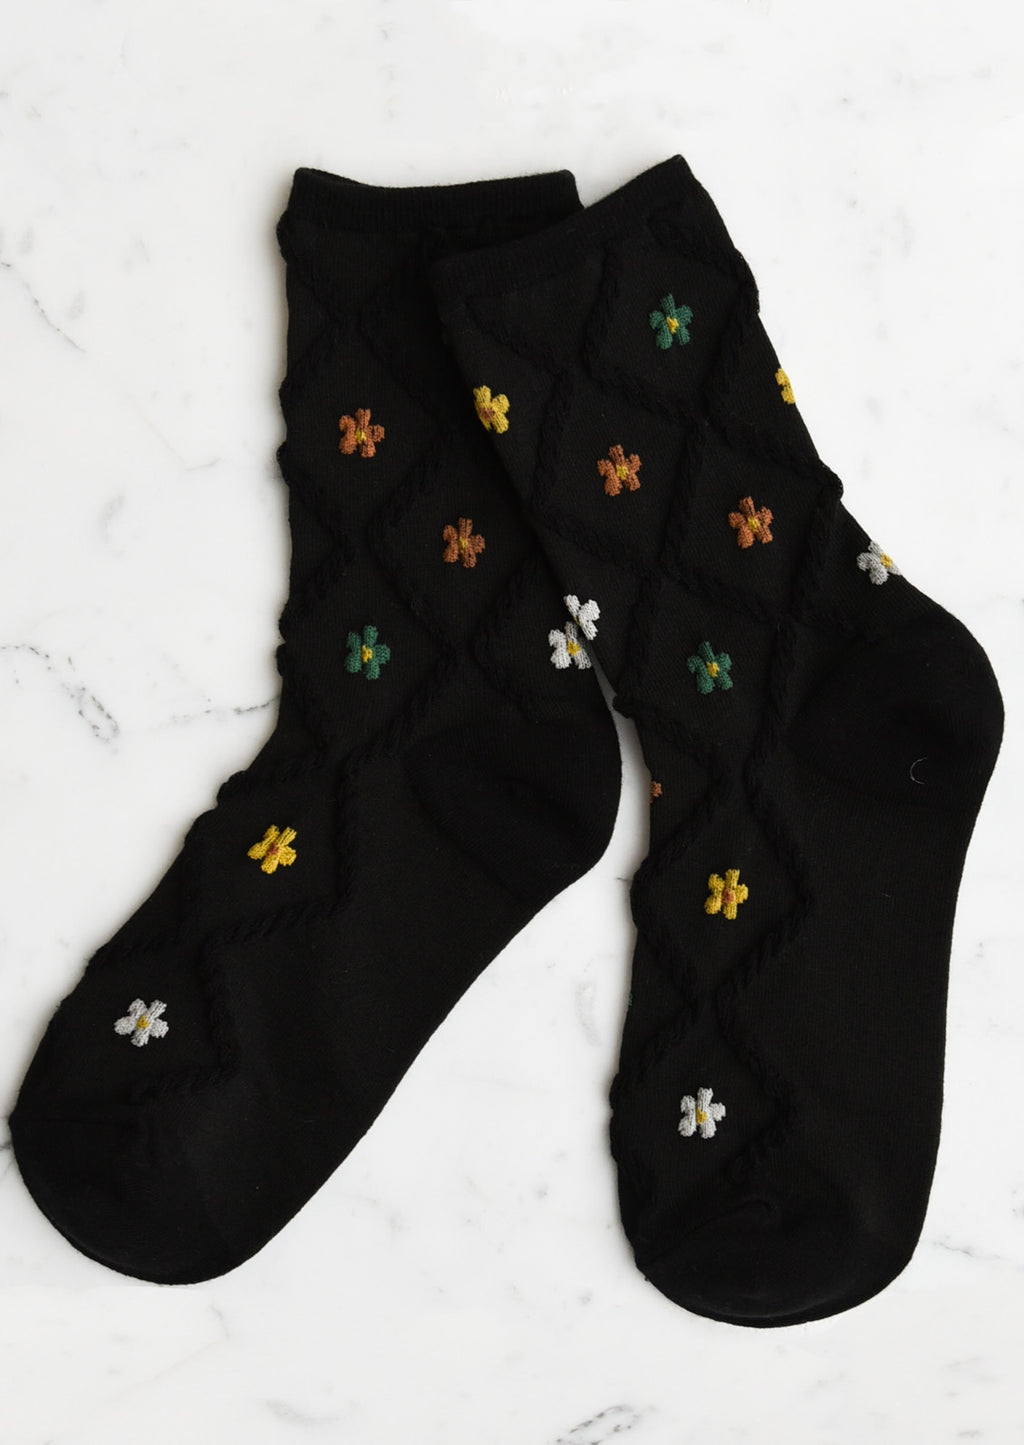 Black Multi: A pair of black socks with diamond pattern and florals.